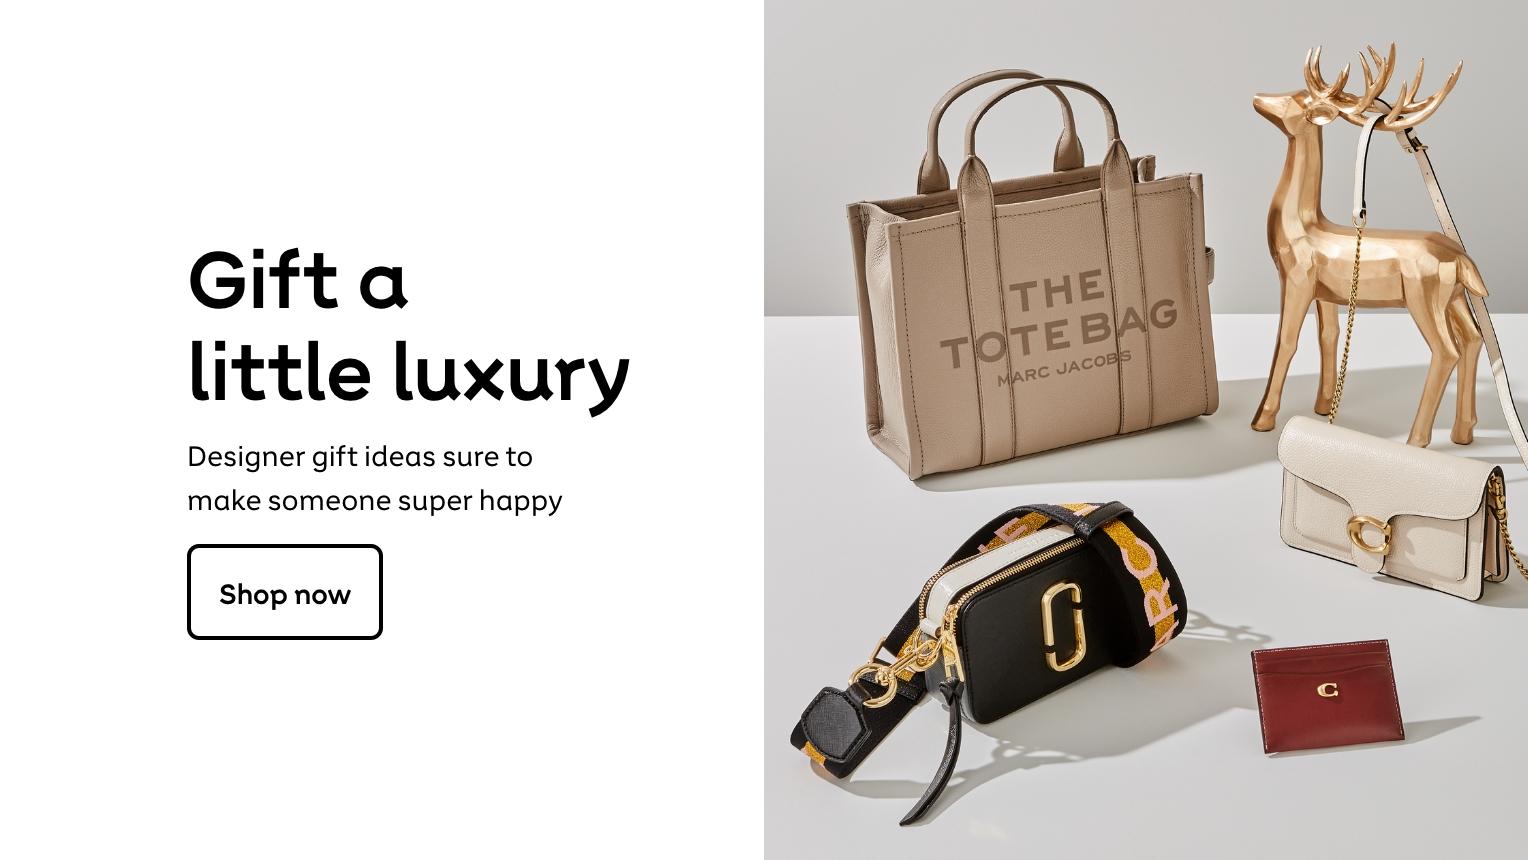 Gift a little luxury. Designer gift ideas sure to make someone super happy. Shop now